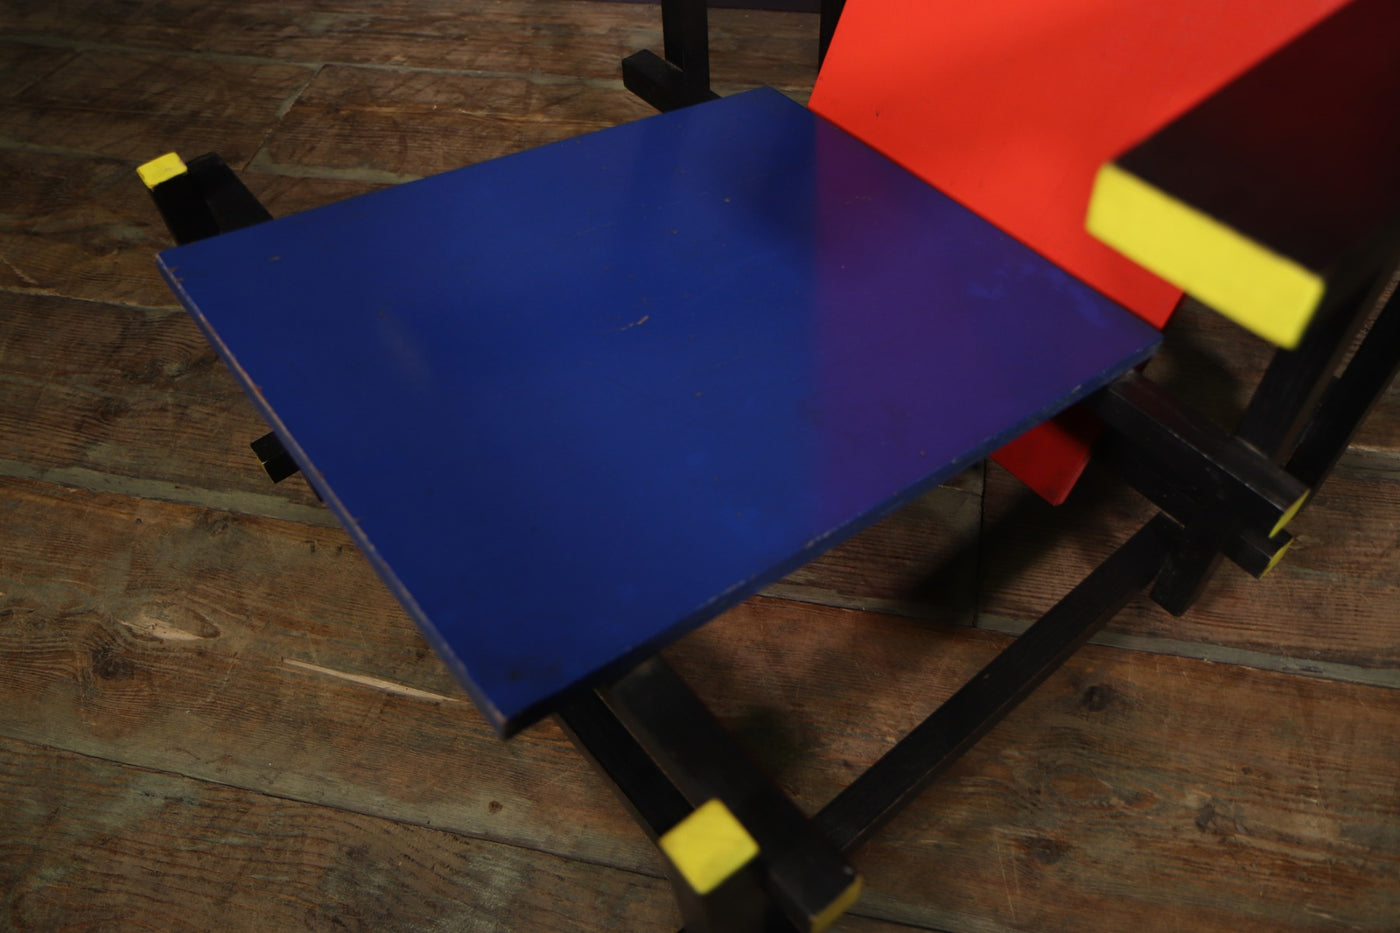 The Red Blue Chair by Gerrit Rietveld c1970